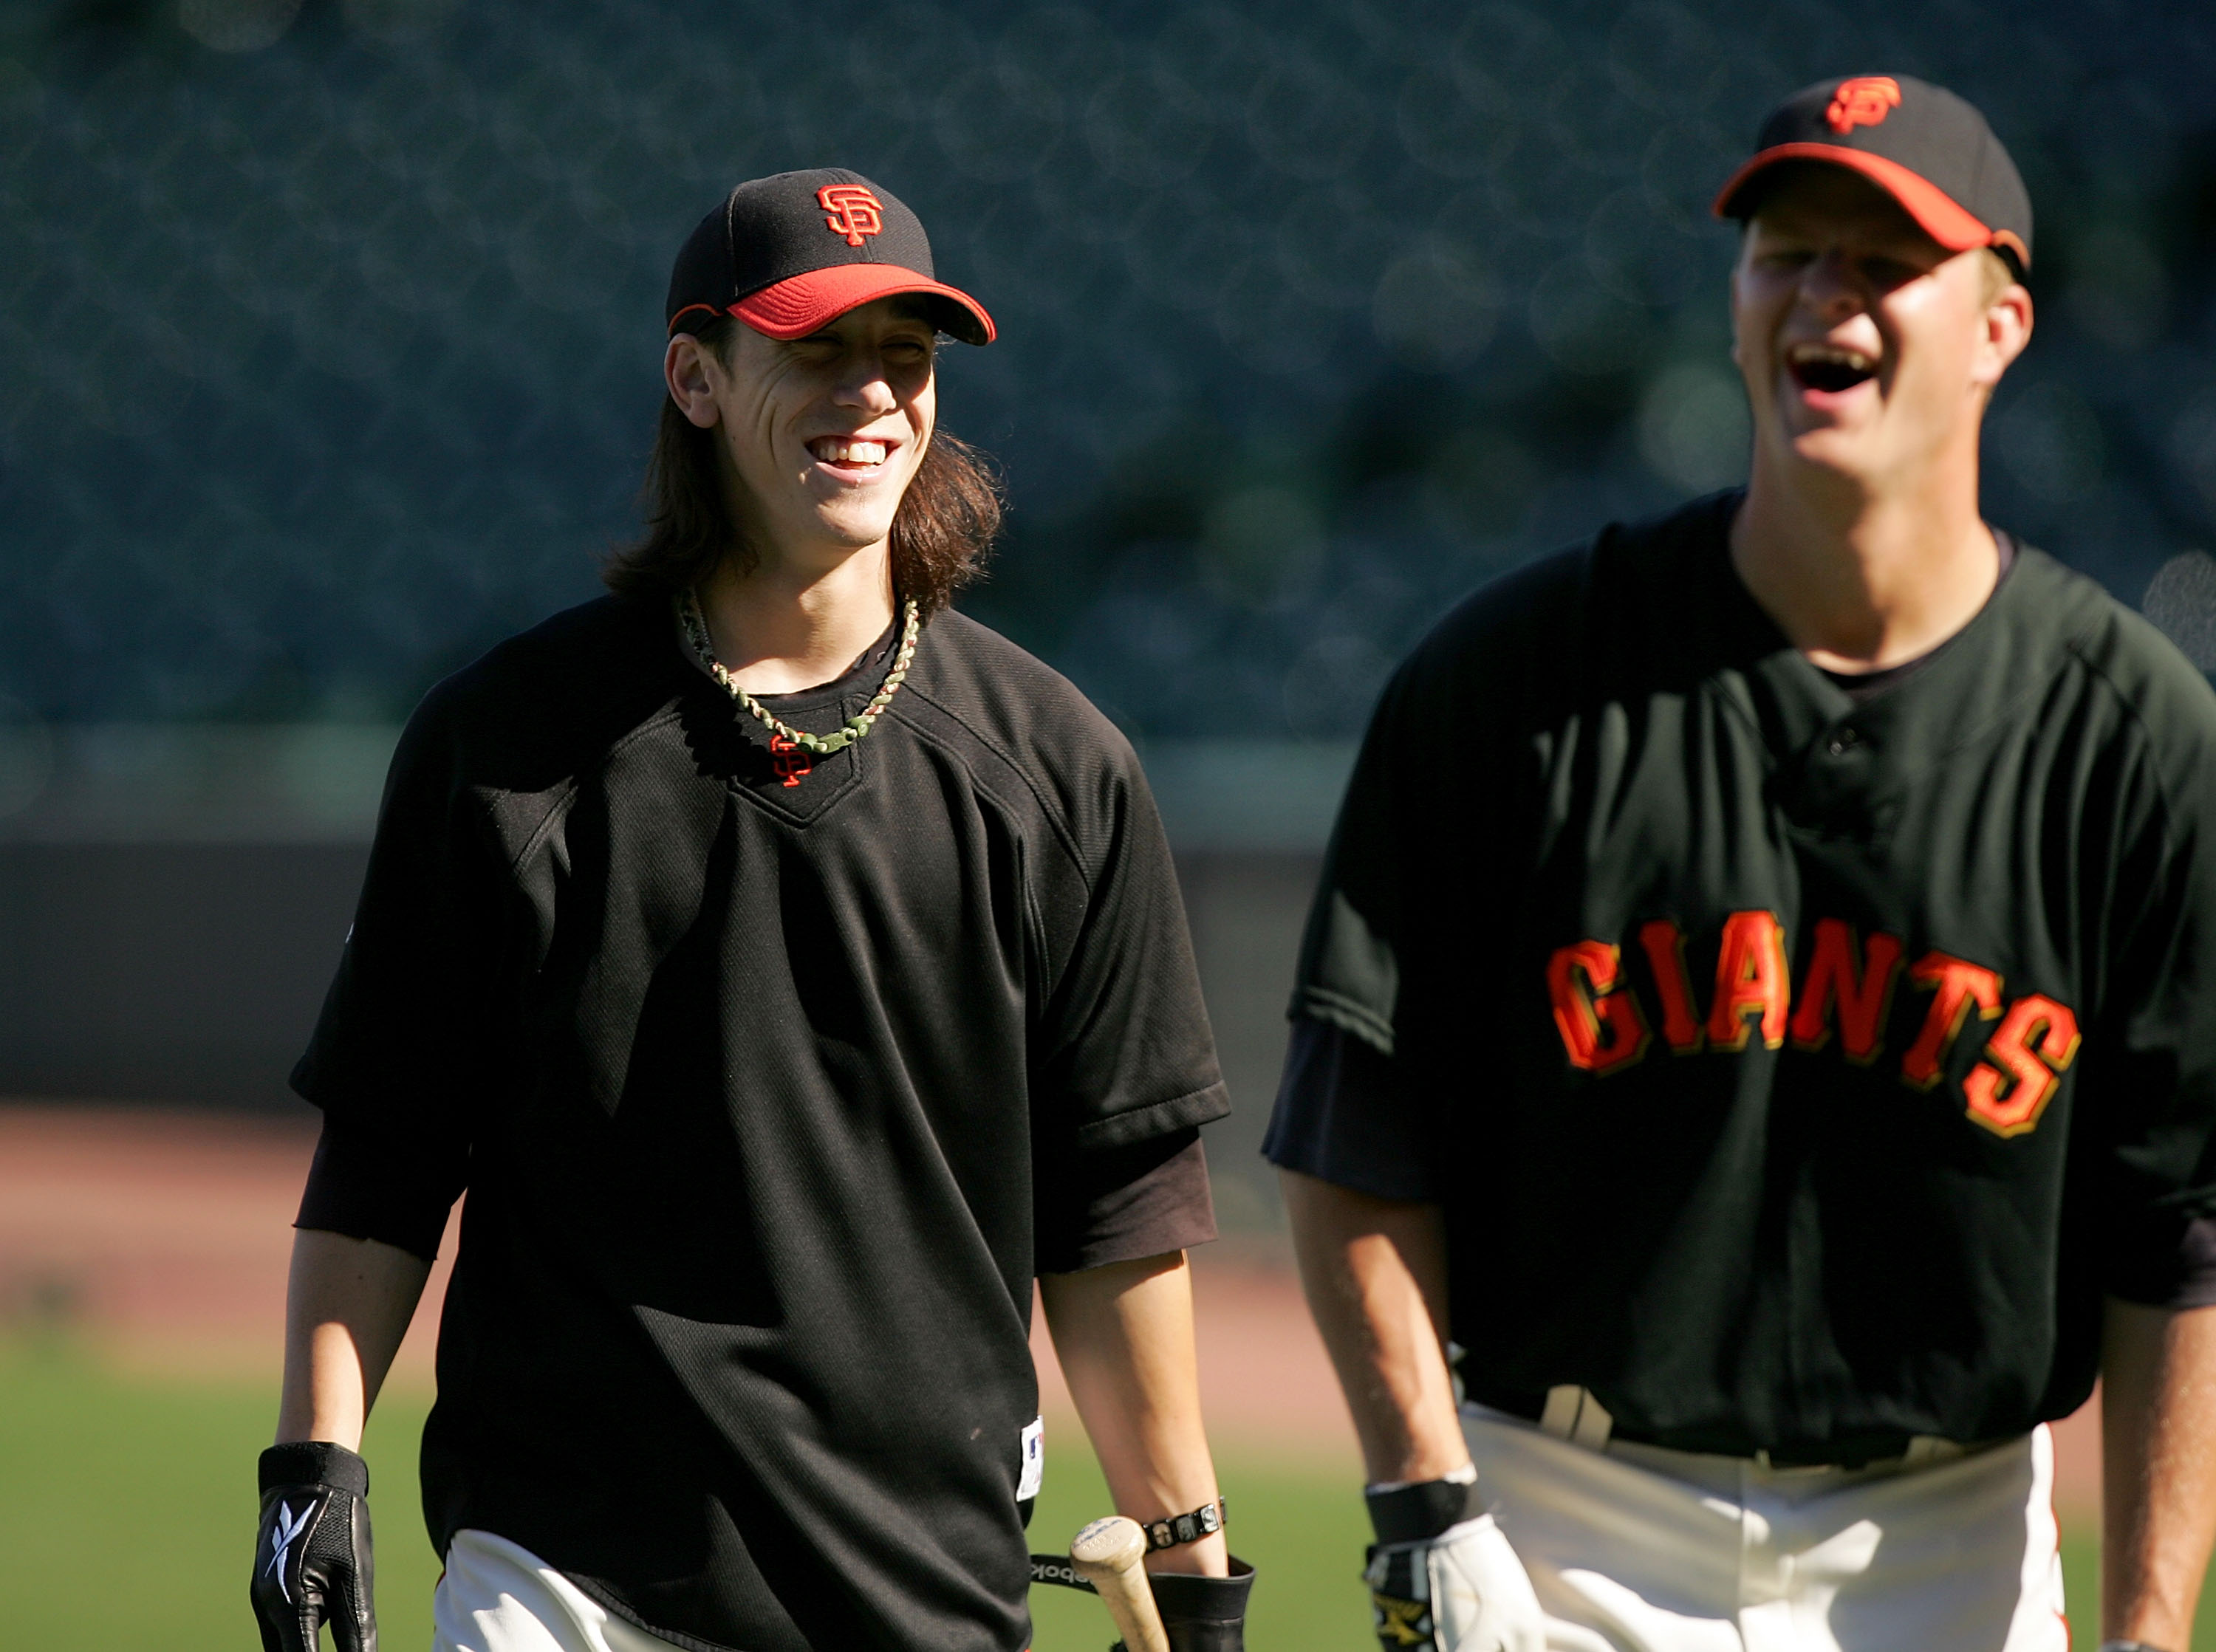 Tim Lincecum injury update: Giants SP escapes major issue after